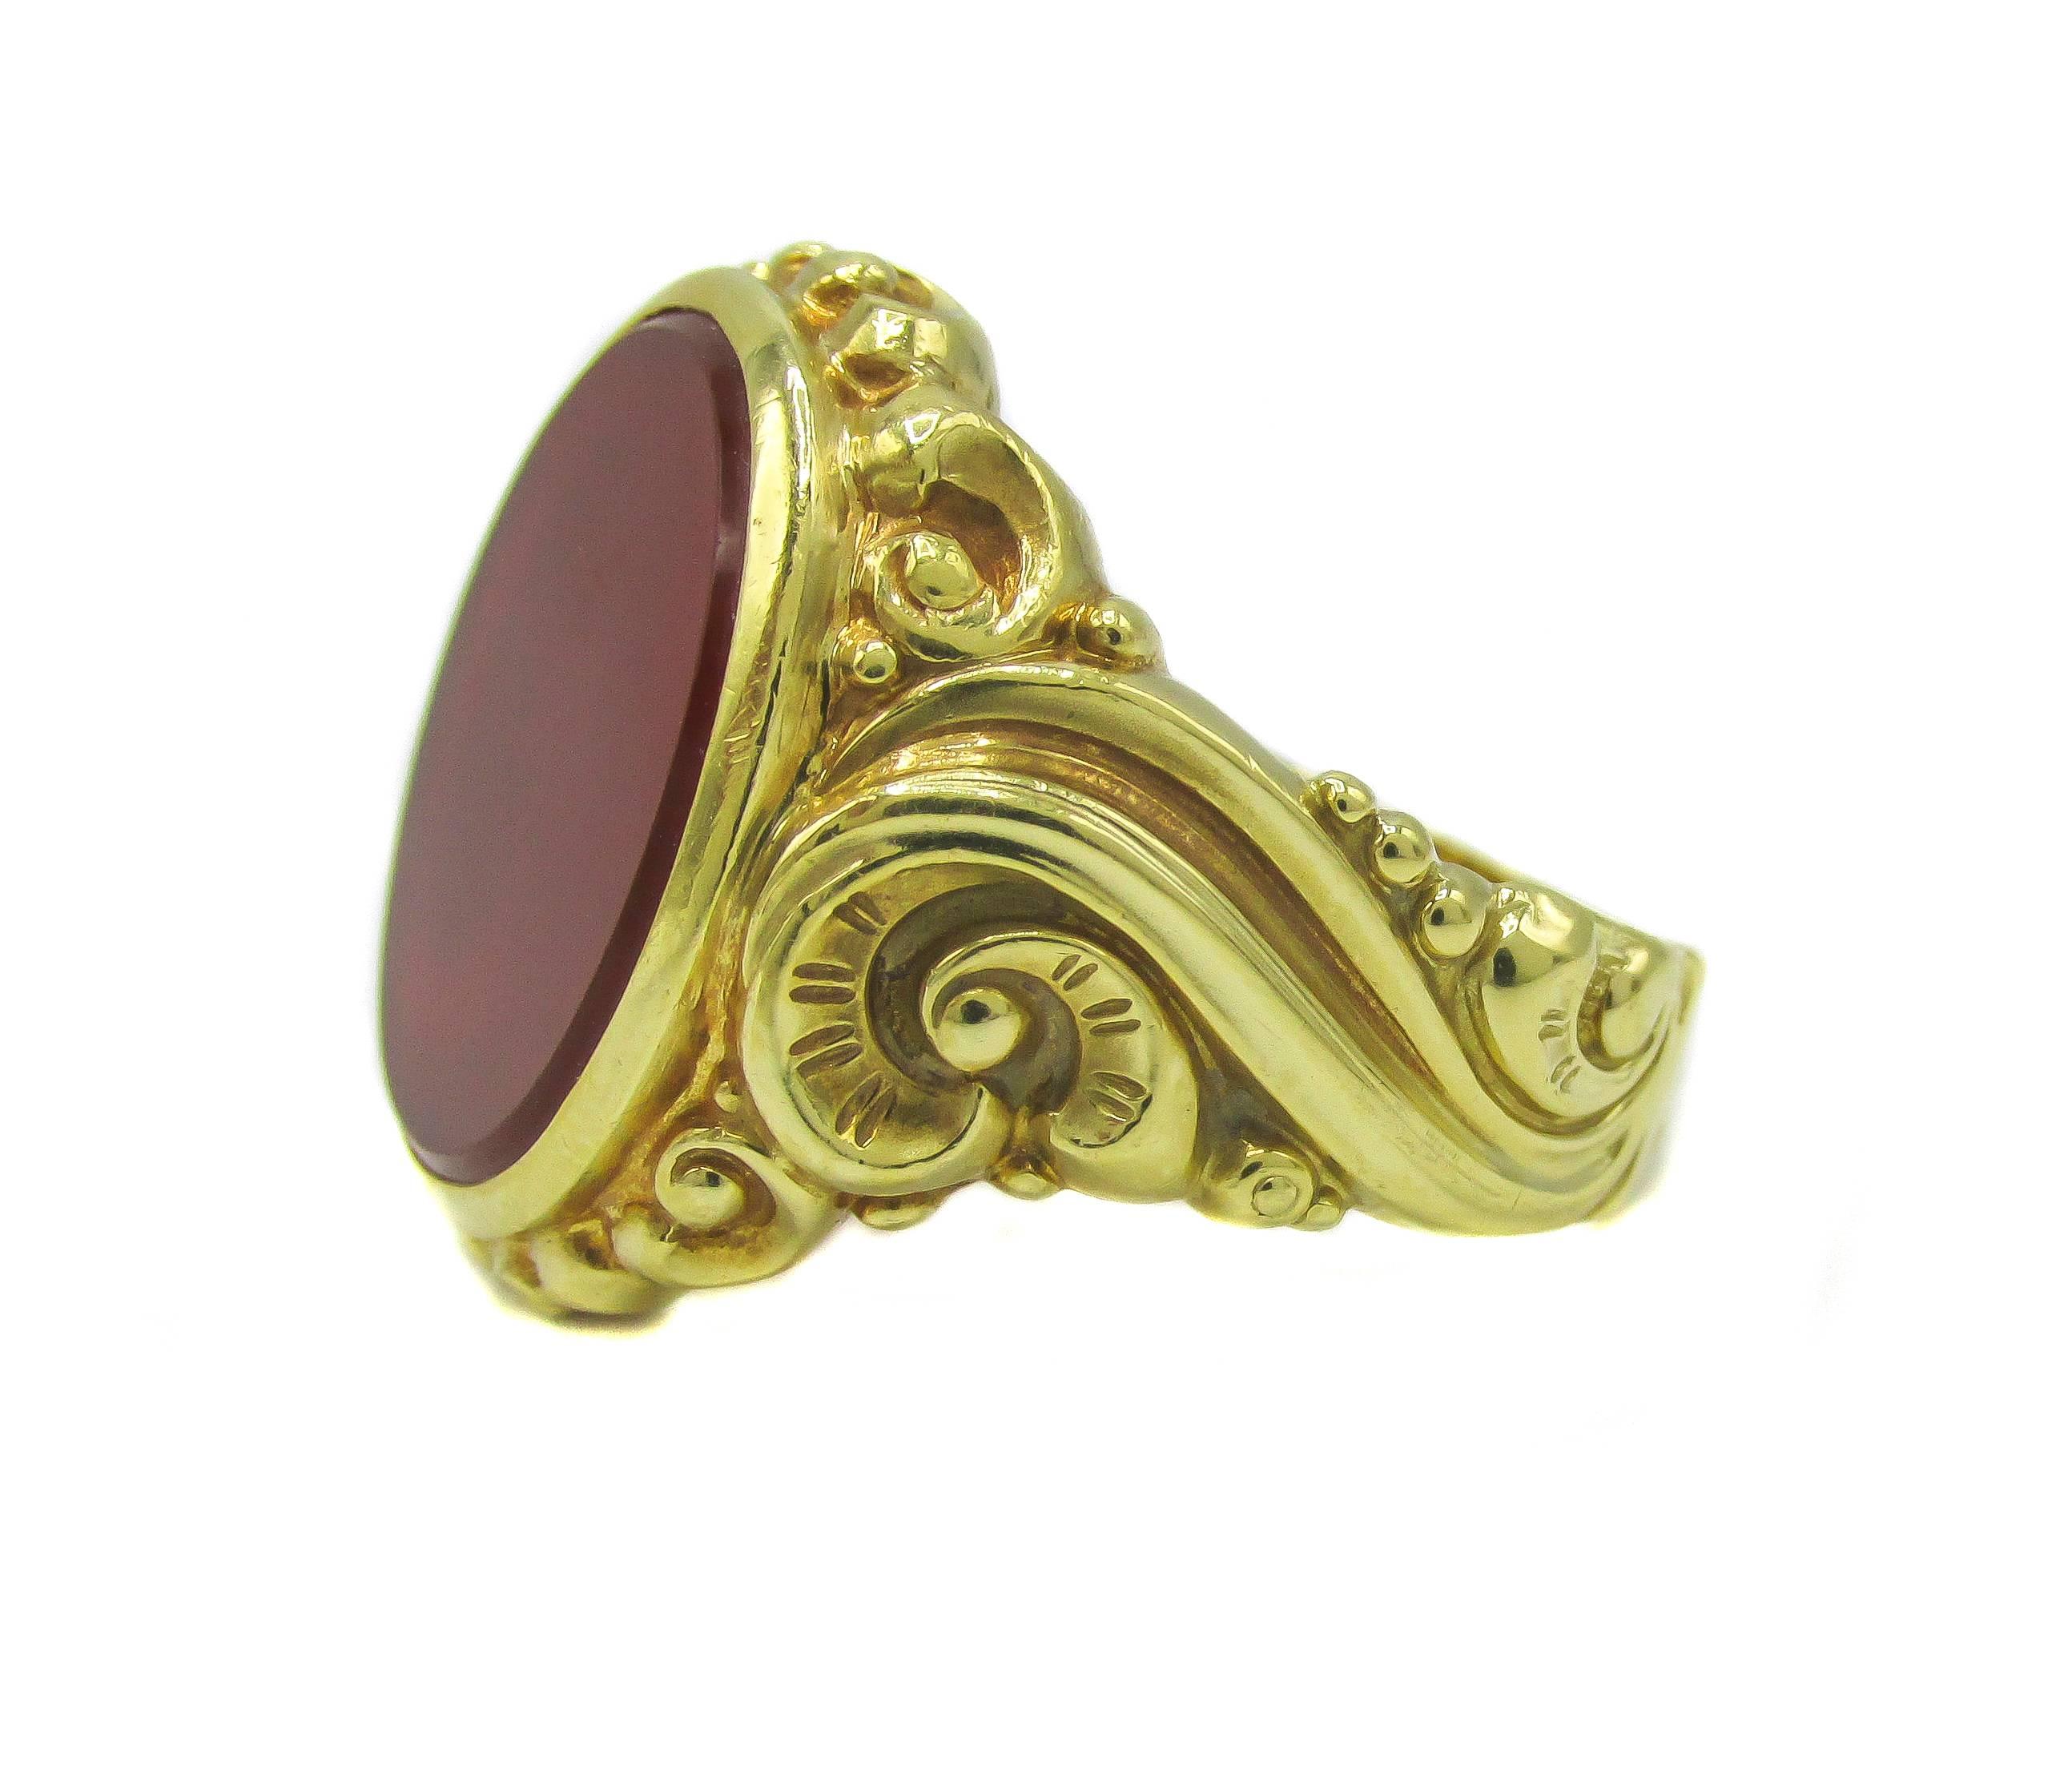 18 karat yellow gold late Victorian seal ring bezel set with a flat smooth oval translucent Carnelian and embellished by fine bead work around the center and elegant scrolls running down the shanks. The inside of the shank is engraved in old script